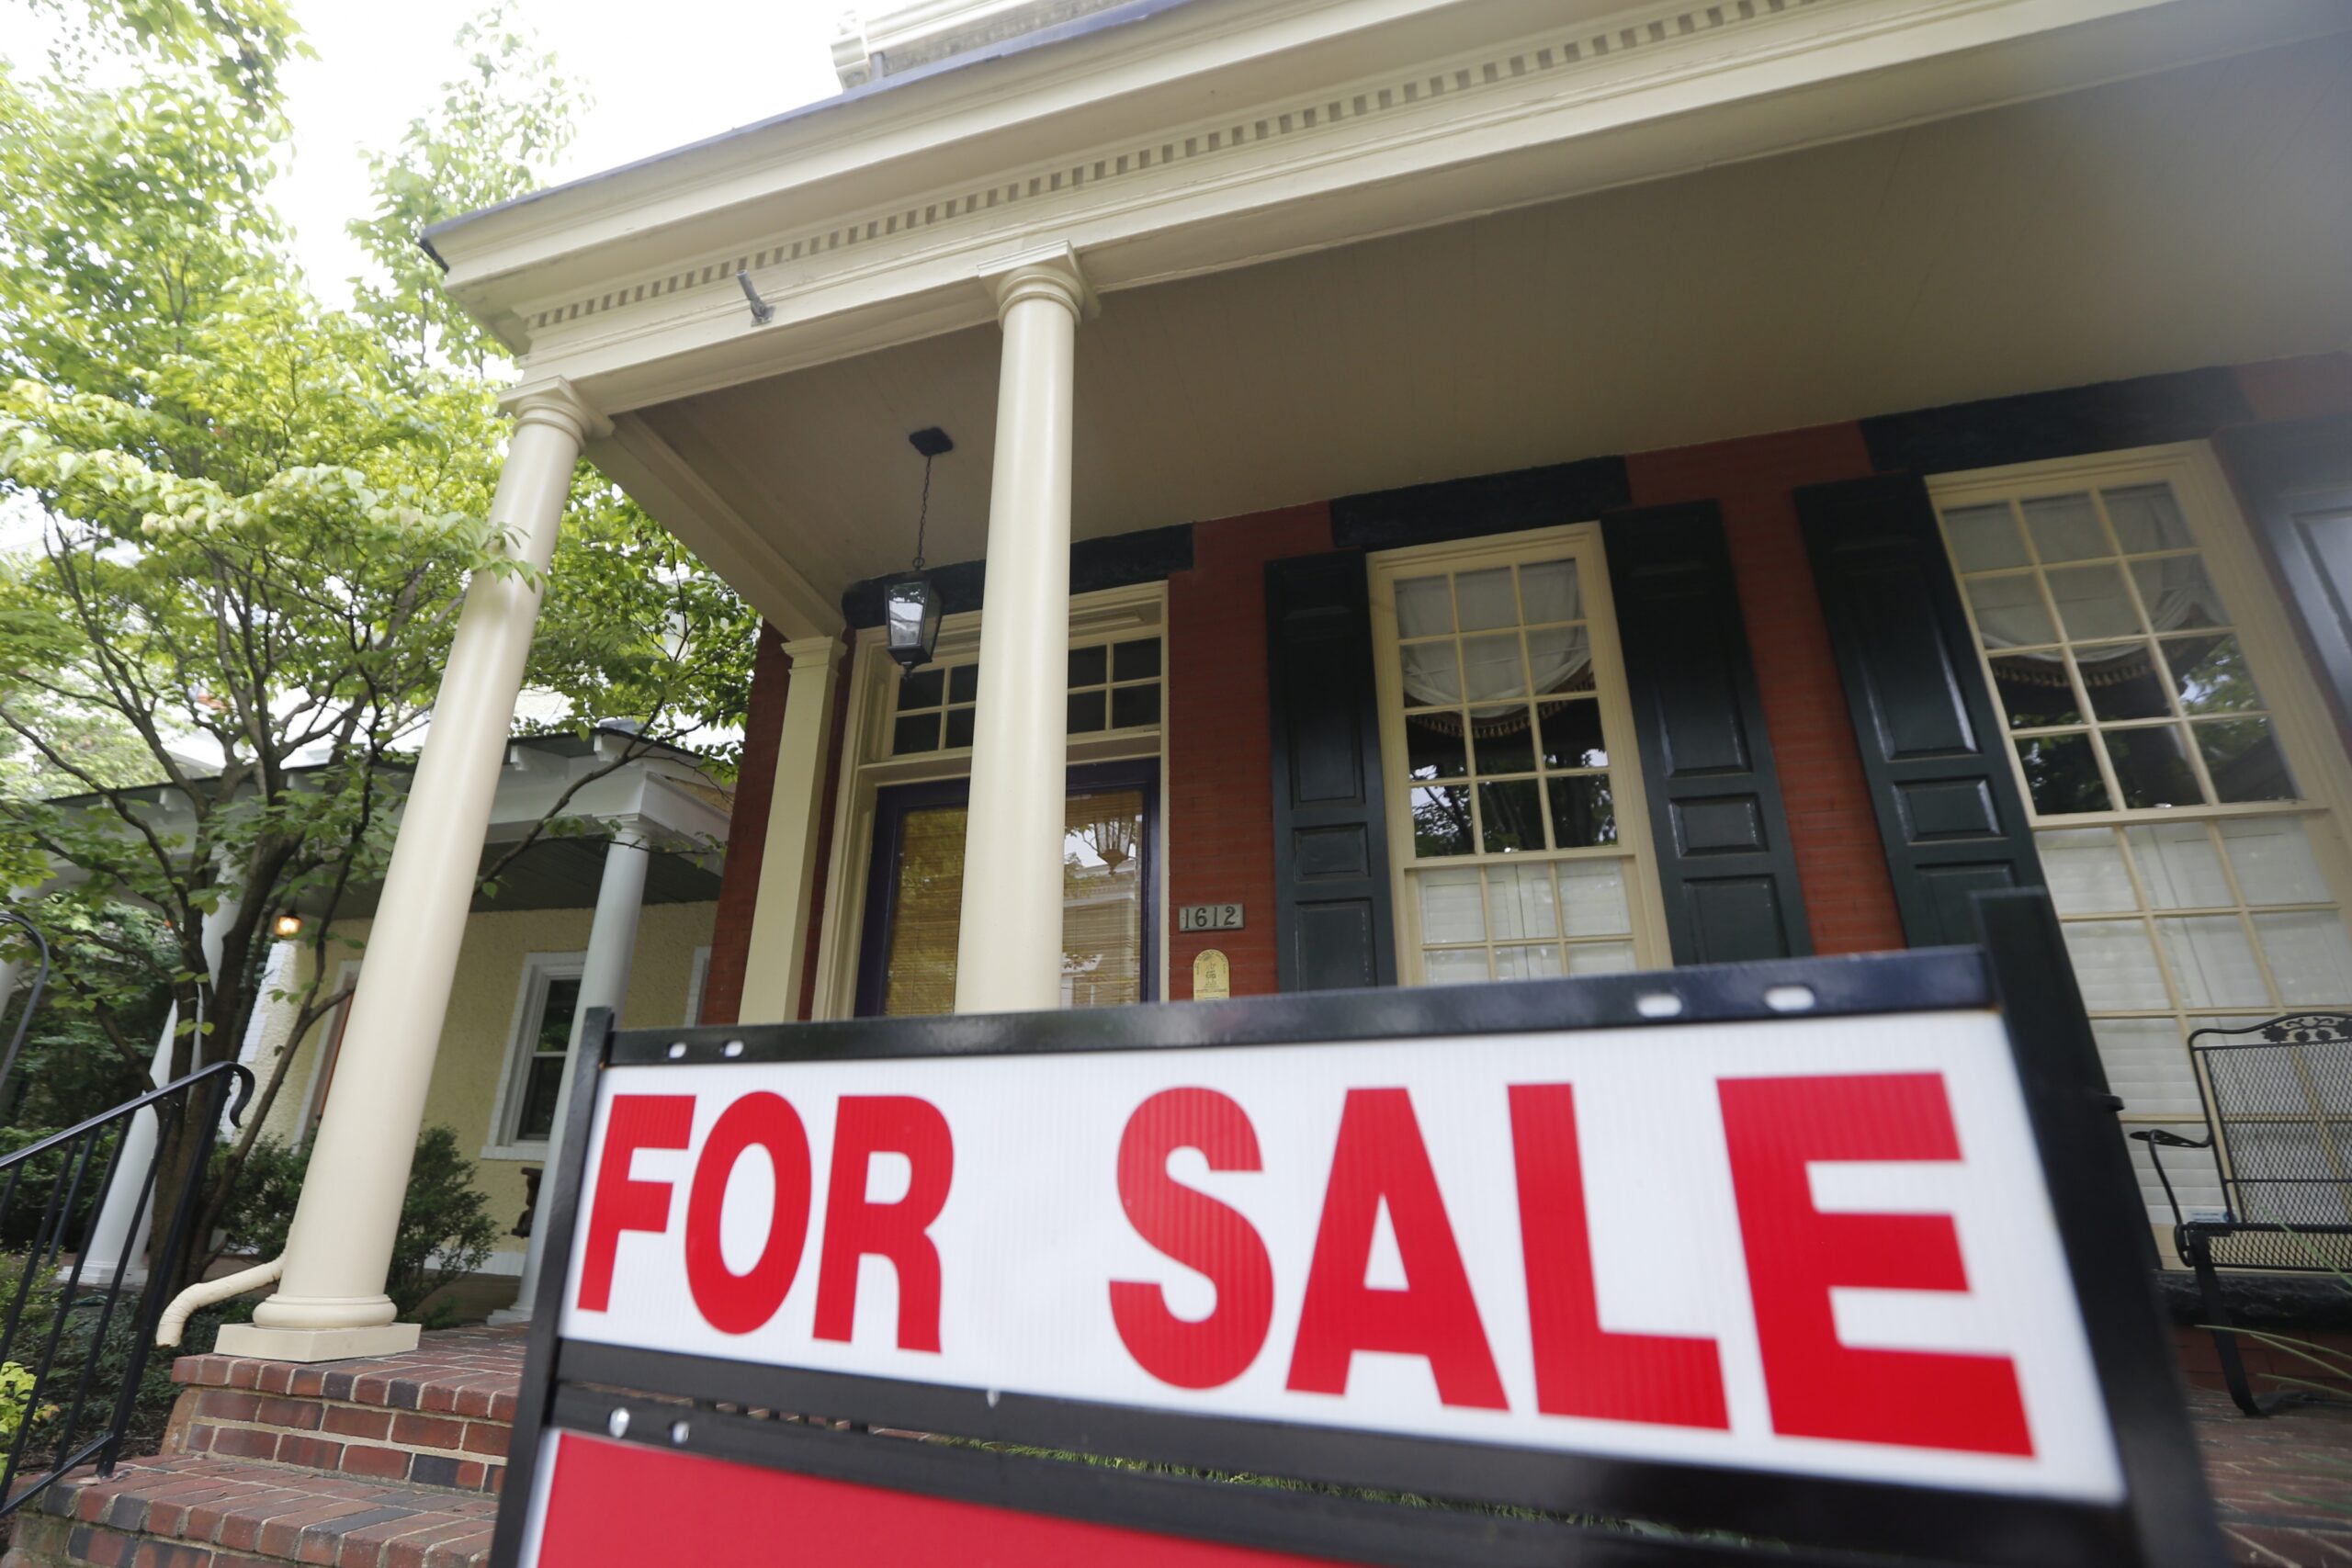 Wisconsin home prices have more than doubled over the last decade